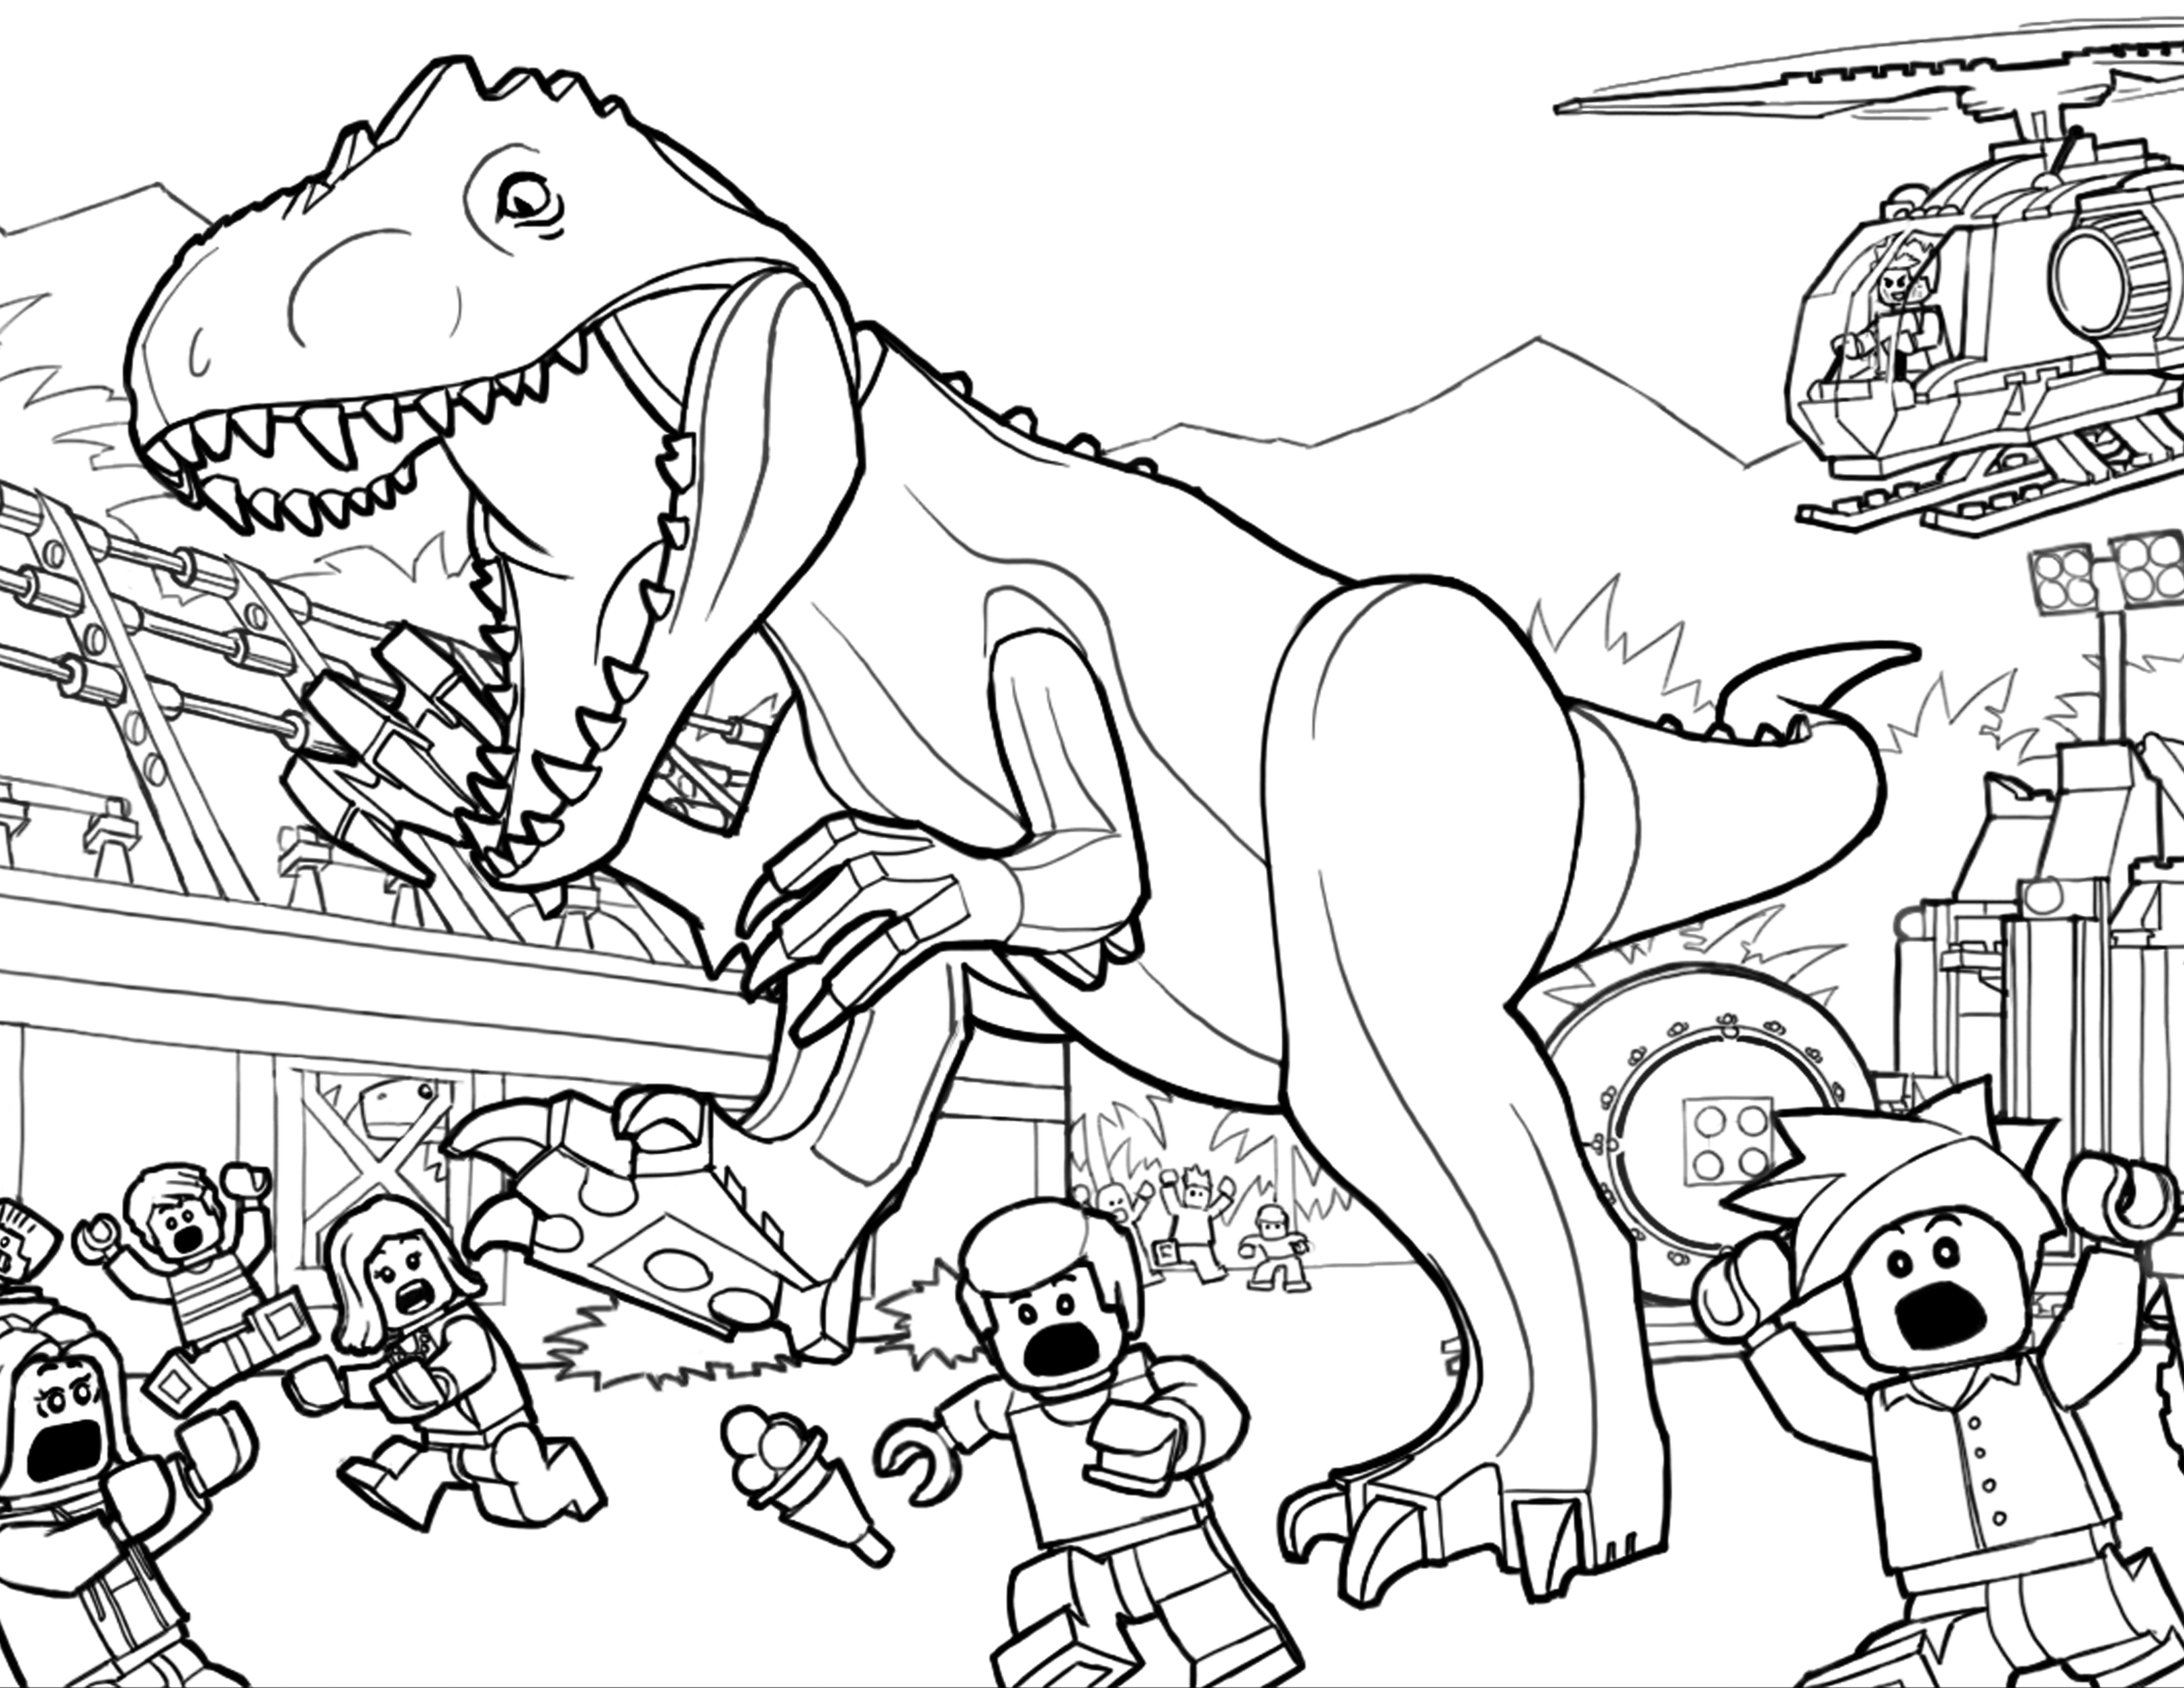 TRex Coloring Pages Best Coloring Pages For Kids